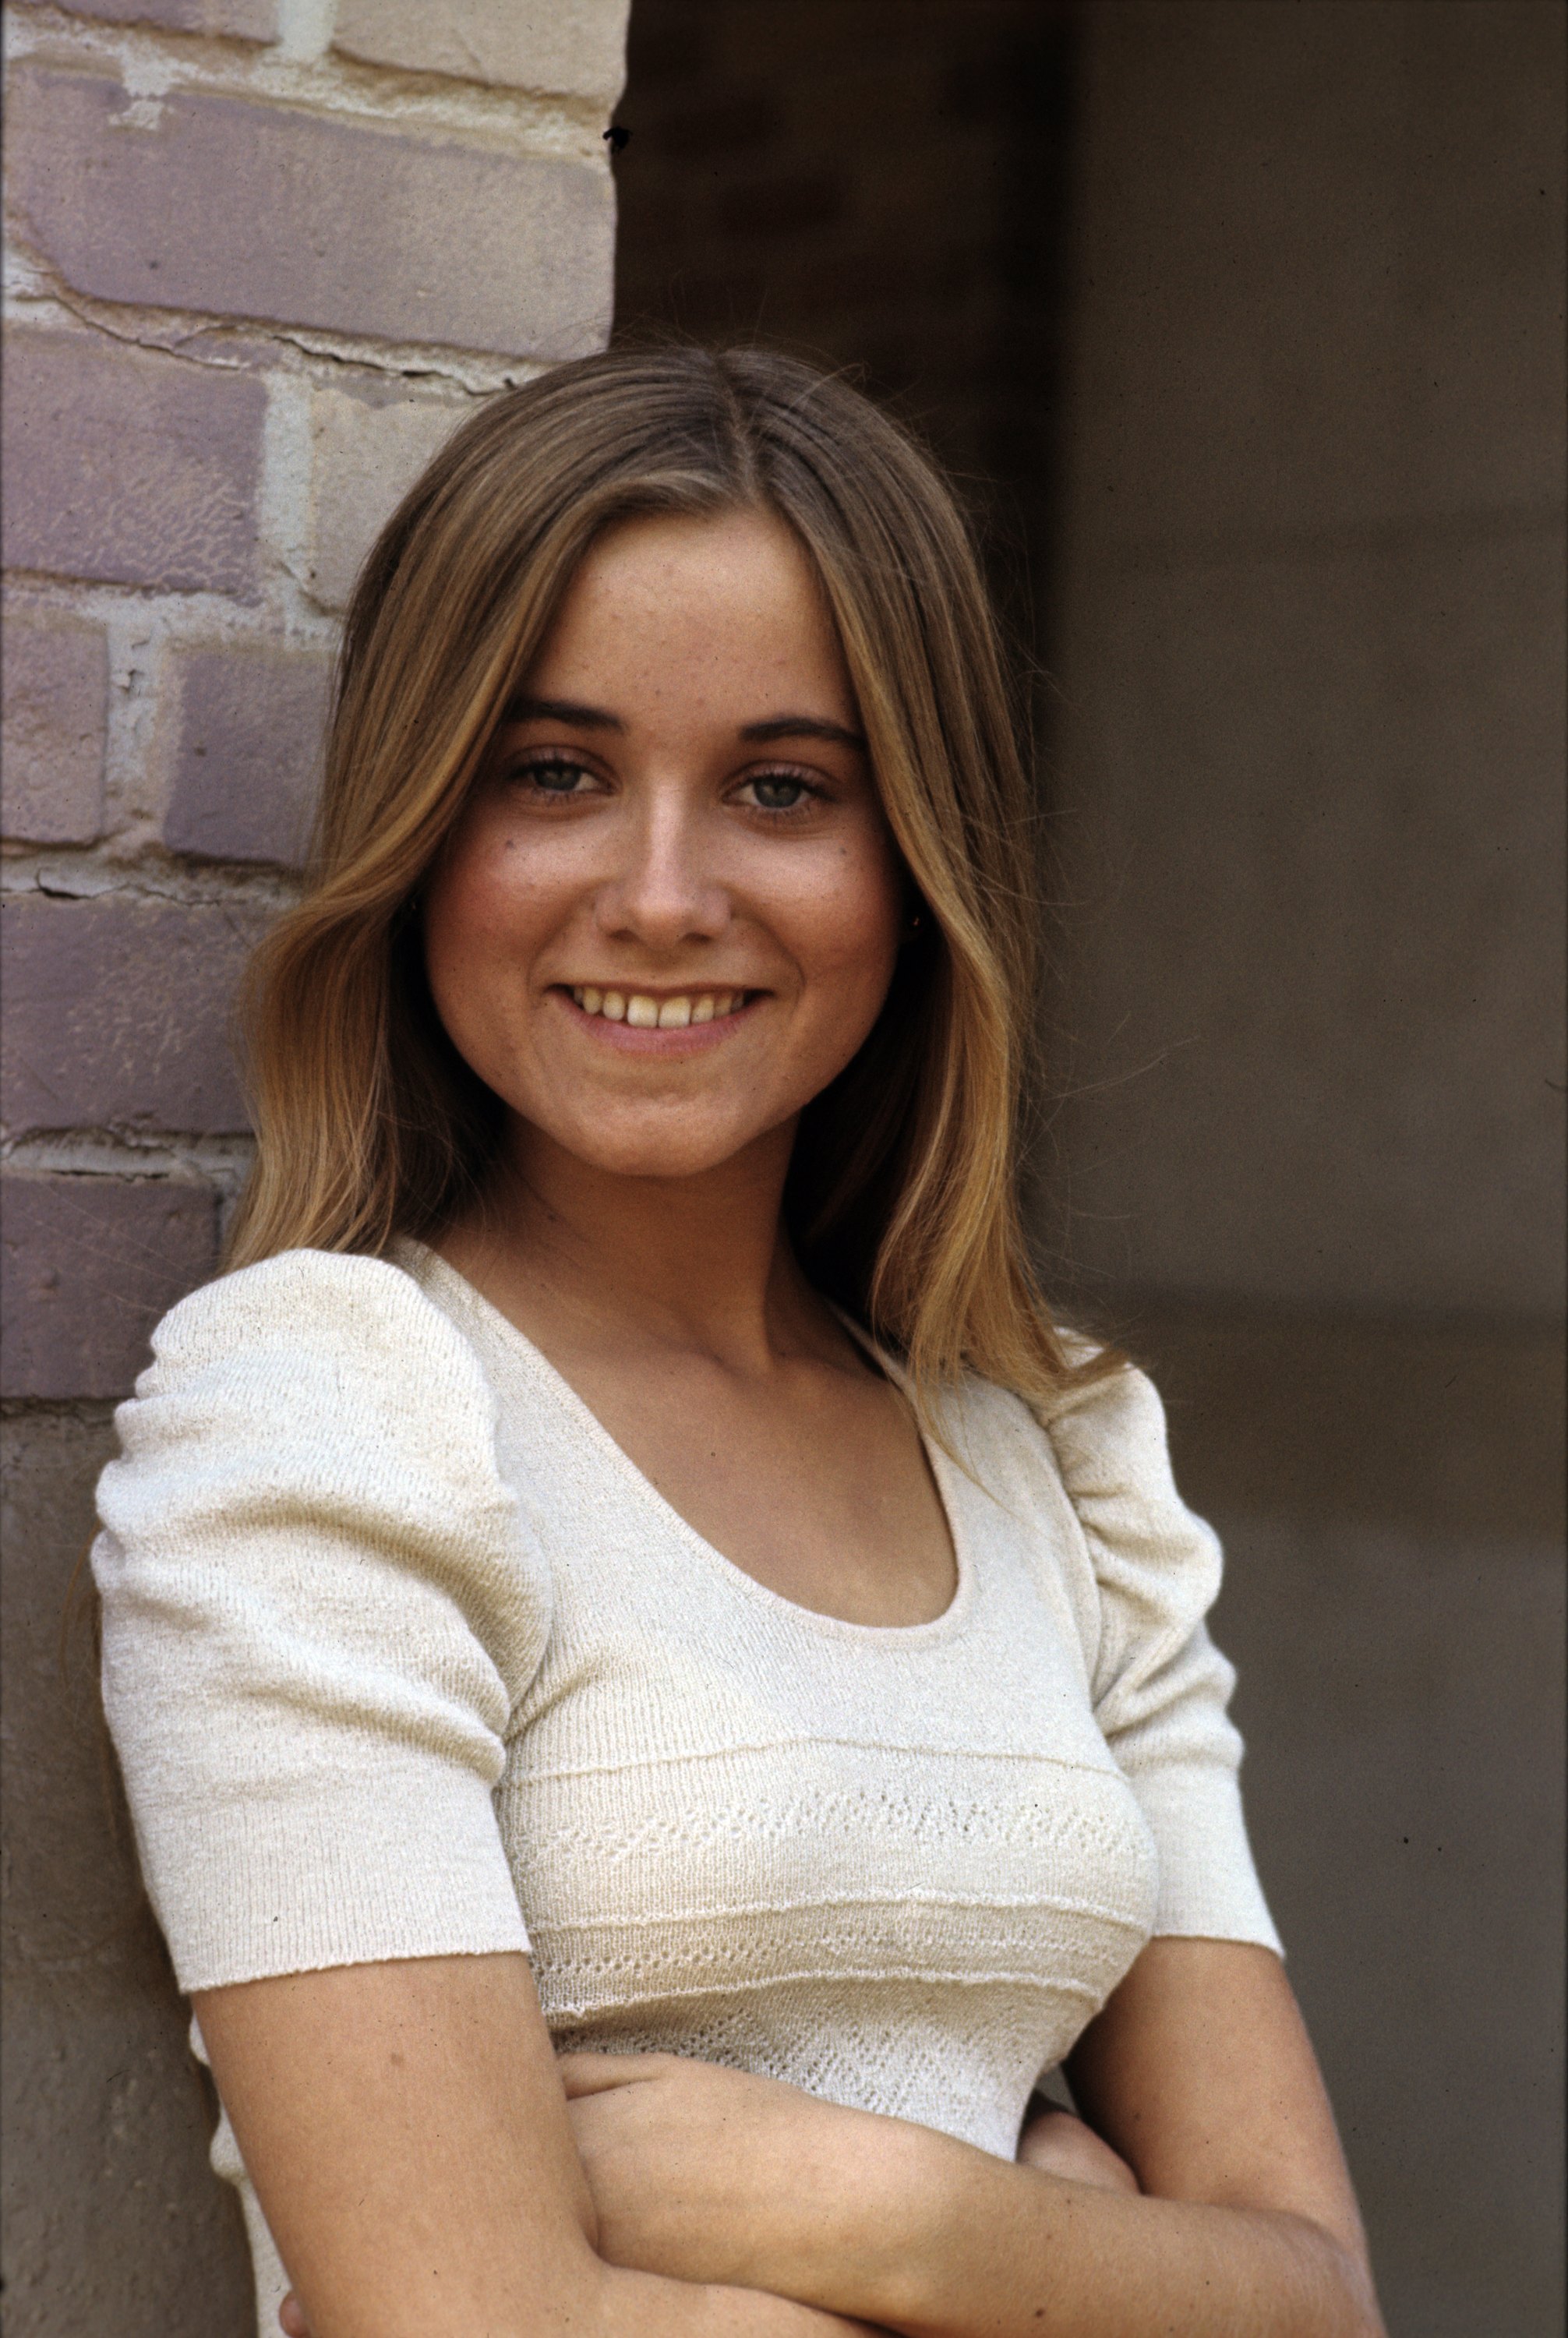 Maureen McCormick as Marcia Brady in the "The Show Must Go On" episode of "The Brady Bunch" in 1972 | Source: Getty Images